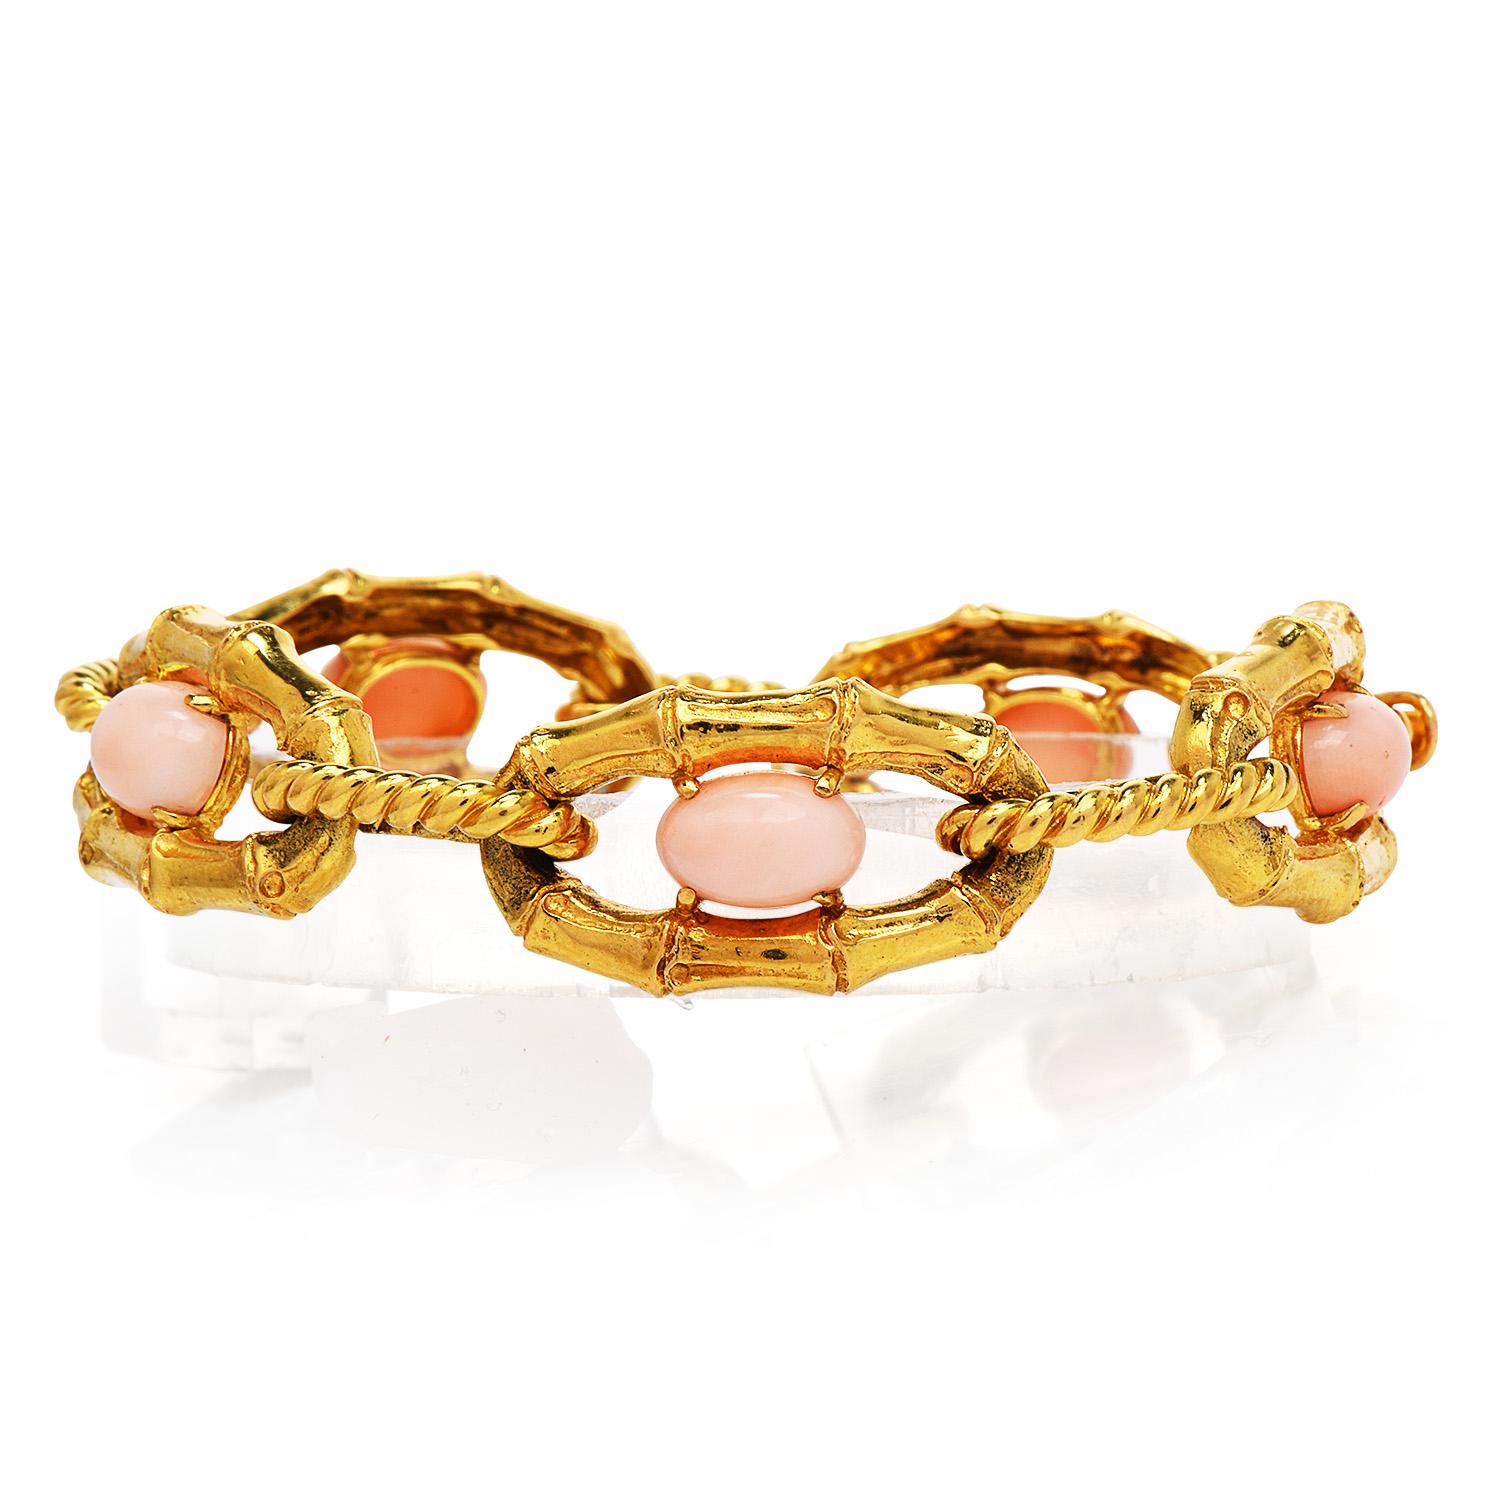 Cabochon Vintage Retro French Pink Coral 18K Yellow Gold Bamboo Link Bracelet